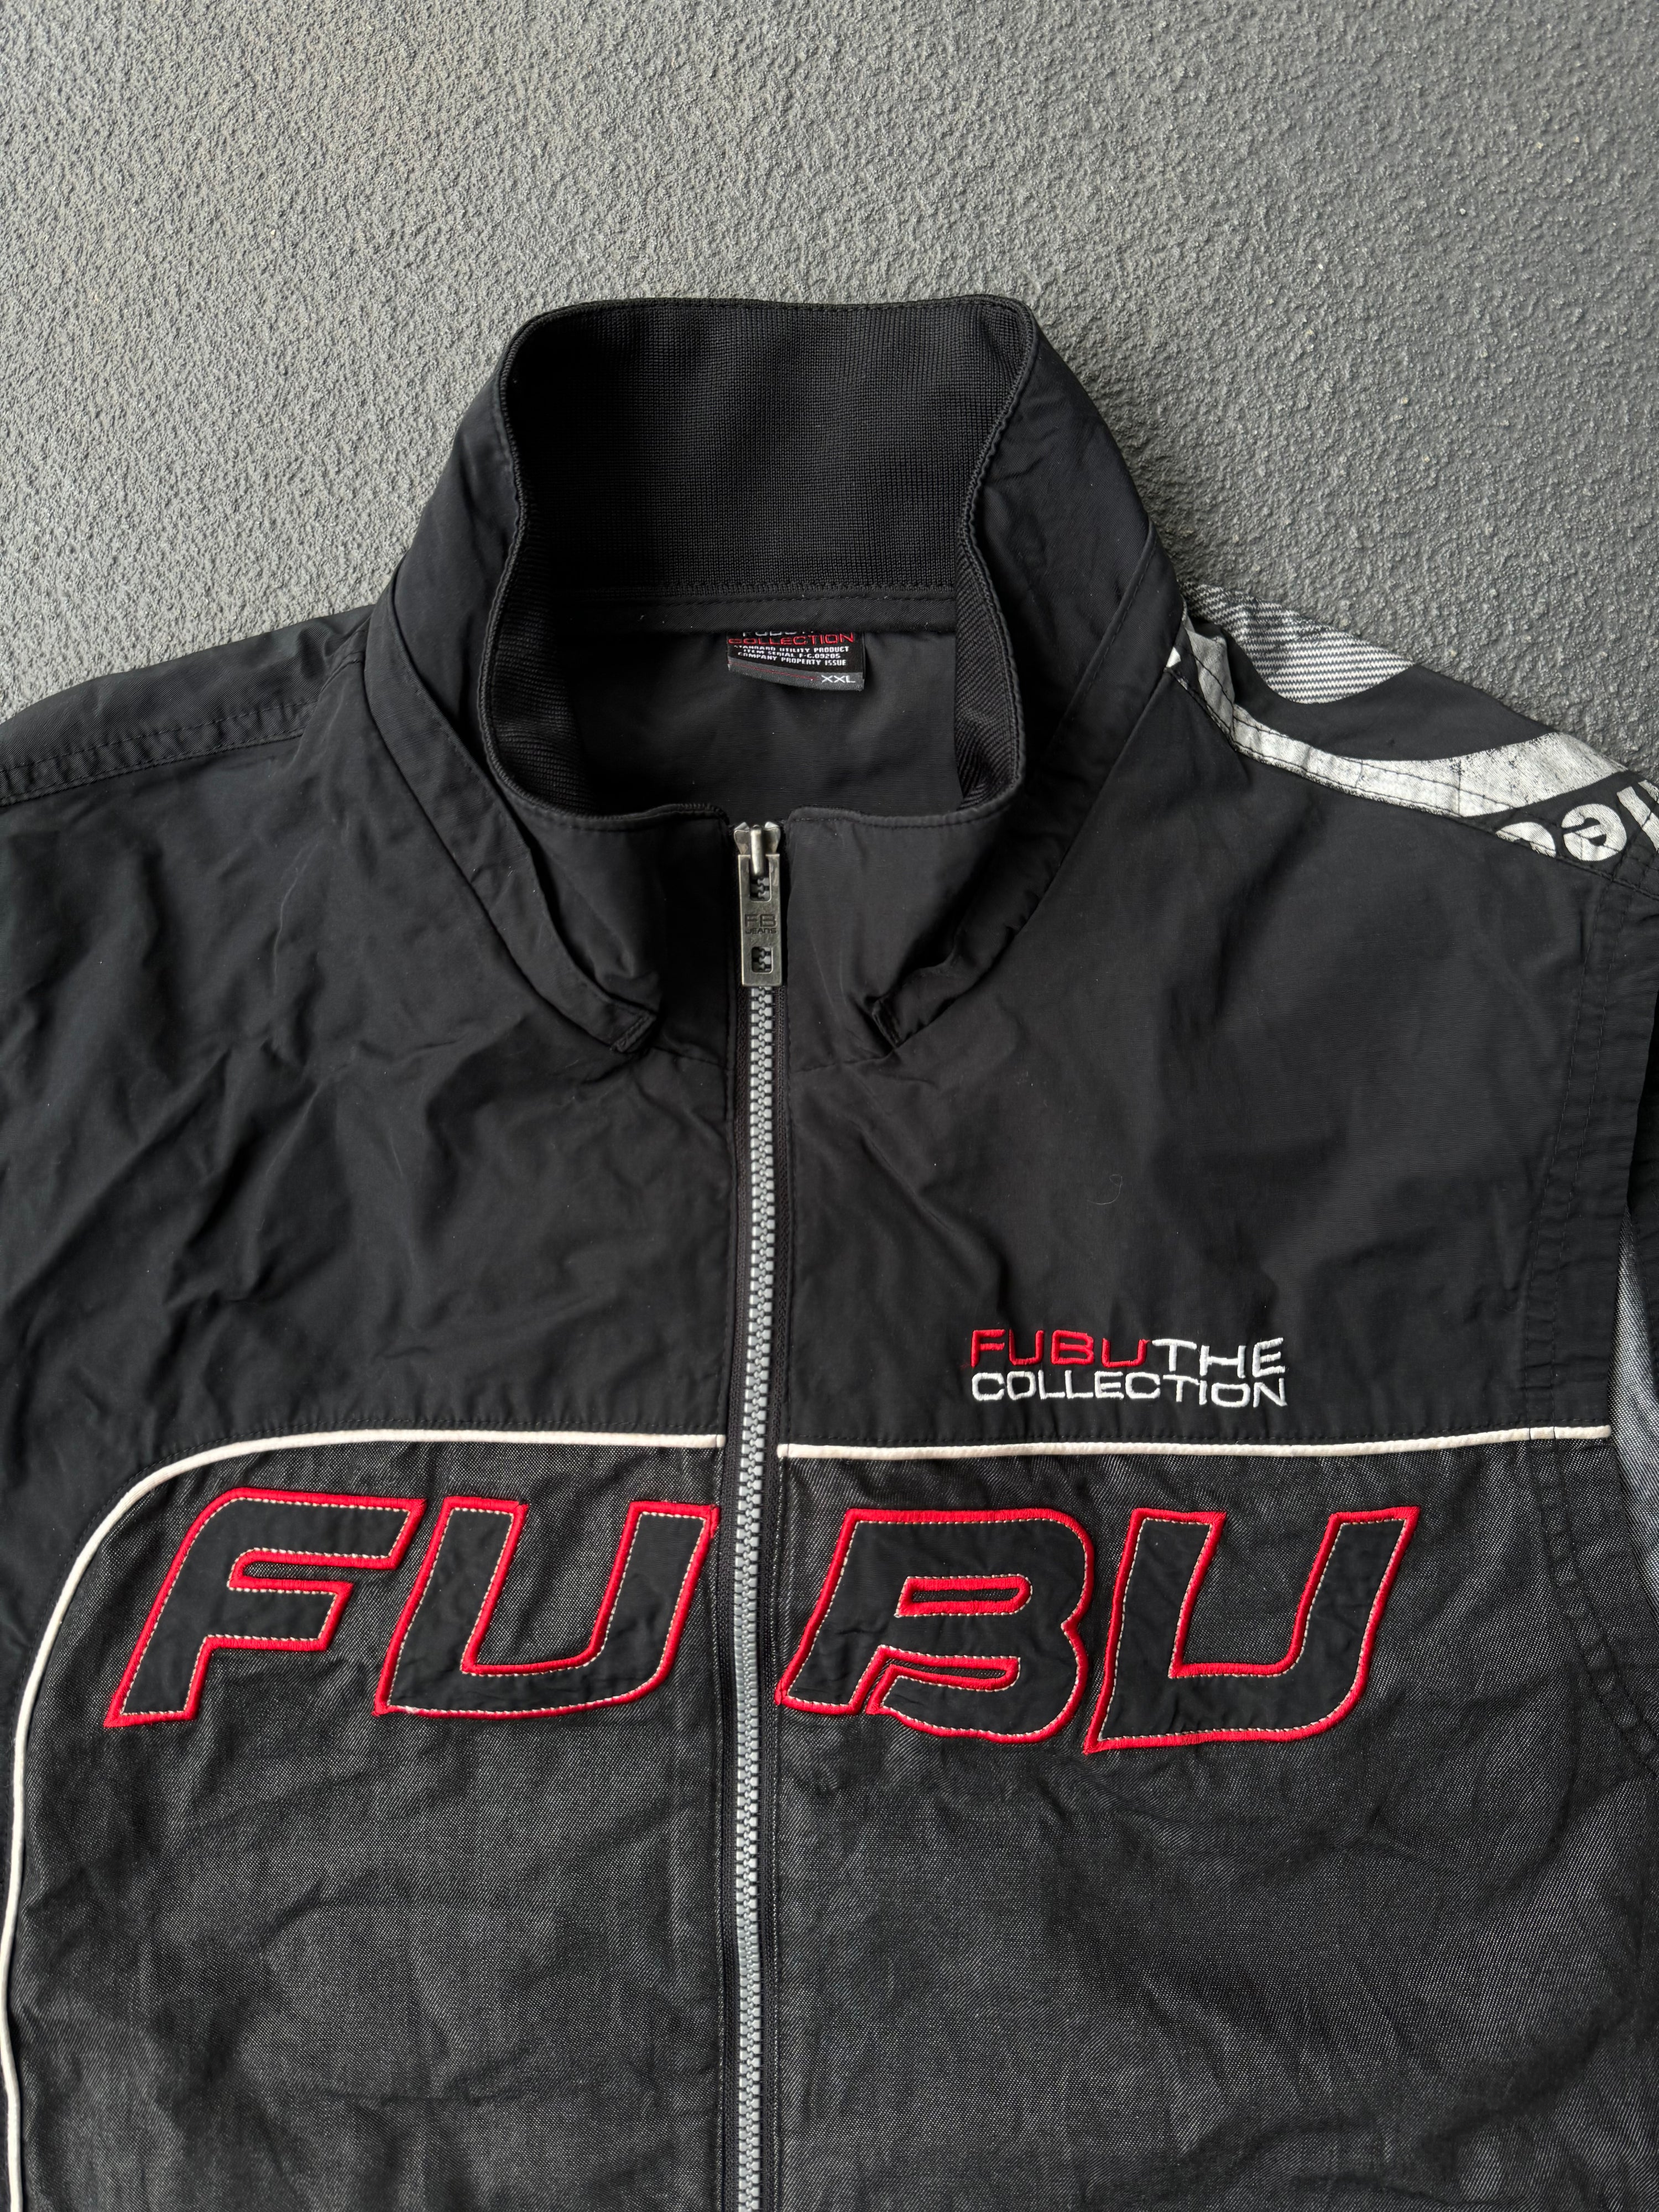 Early 2000s Fubu The Collection Zipped Up Over Vest (XL)